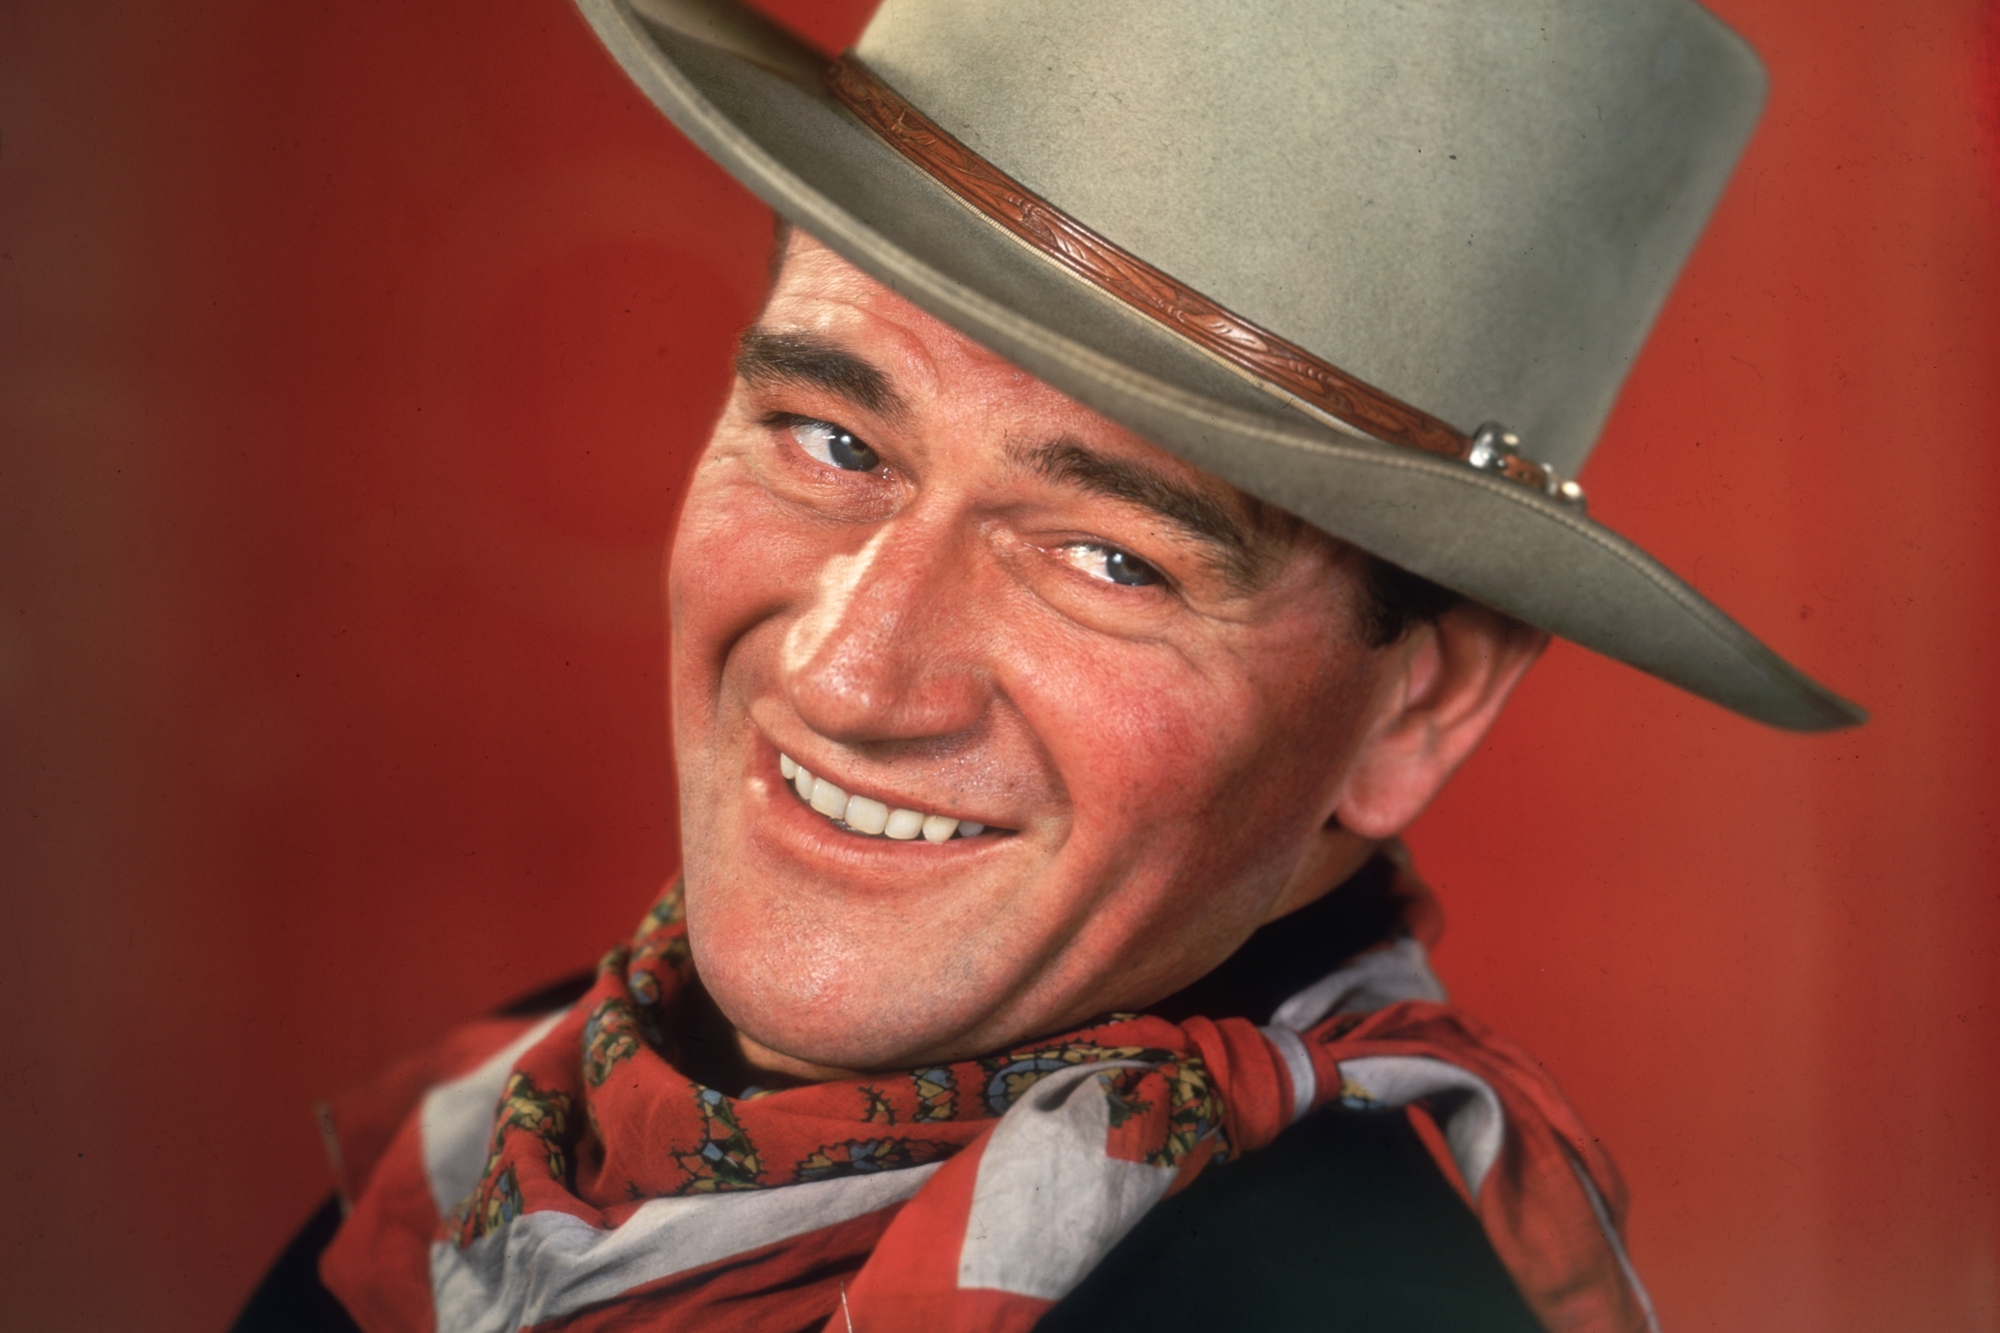 John Wayne, a star of Western movies. He's wearing a cowboy hat, smiling in front of a red background.